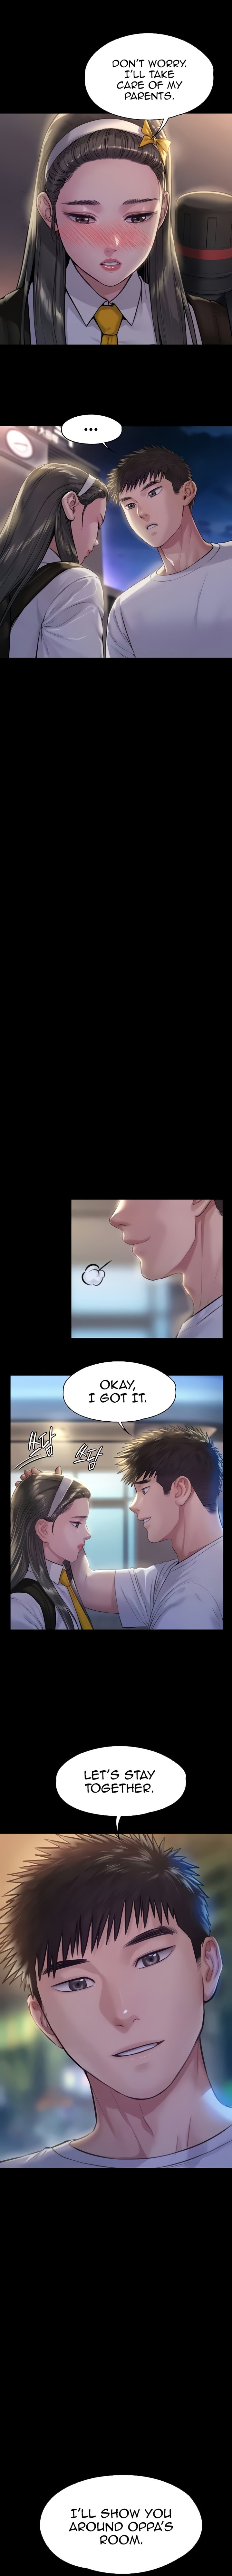 Panel Image 1 for chapter 194 of manhwa Queen Bee on read.oppai.stream